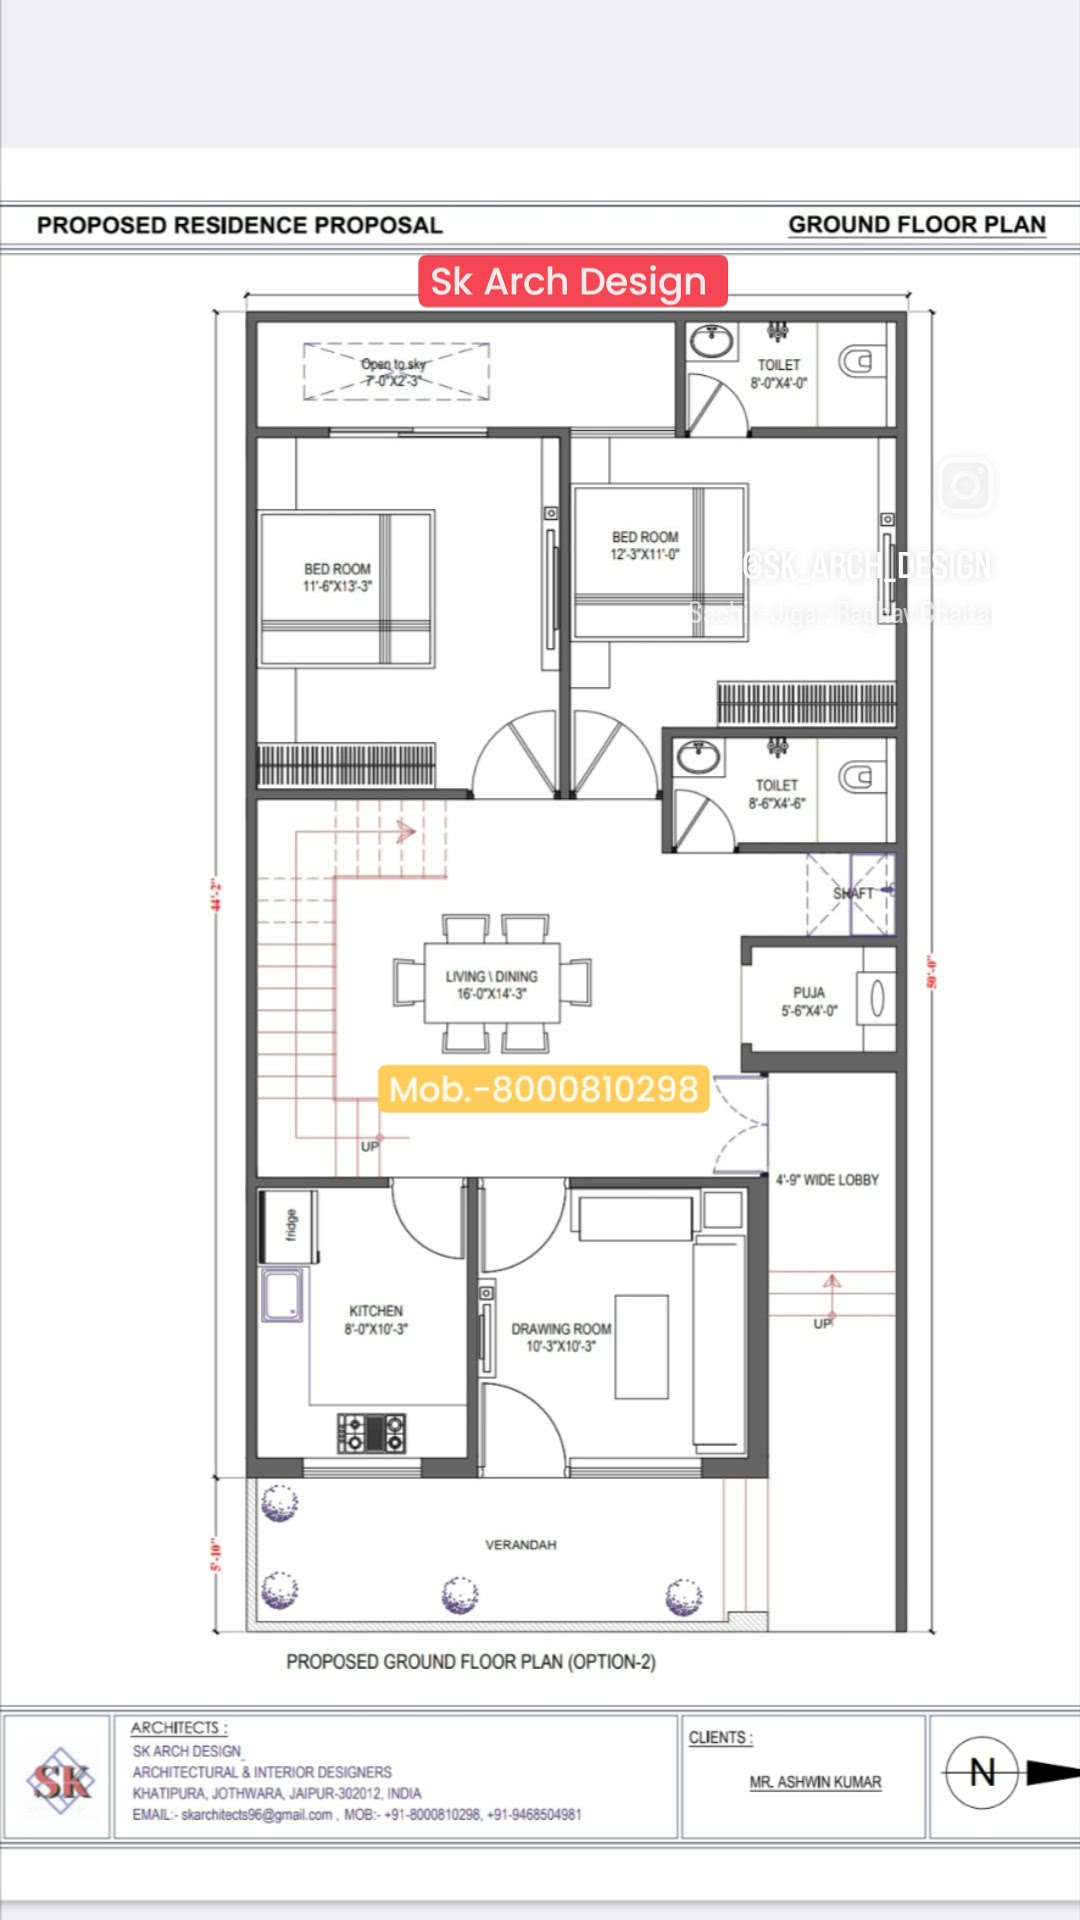 #houseplaning #housedesign #interiors #vastushastra #contractor #jaipurdiaries #architect #architecturedesign #planing #2dplan
#structure #houseworking #electrical #drawing #designer #exteriordesign #architecture #drawing #shuttering #plane #doordesign #window#design
.
.
contact for :- 
.
WhatsApp link:- https://wa.me/message/ZNMVUL3RAHHDB1
email - skarchitects96@gmail.com
Website - http://Skarchdesign96.com